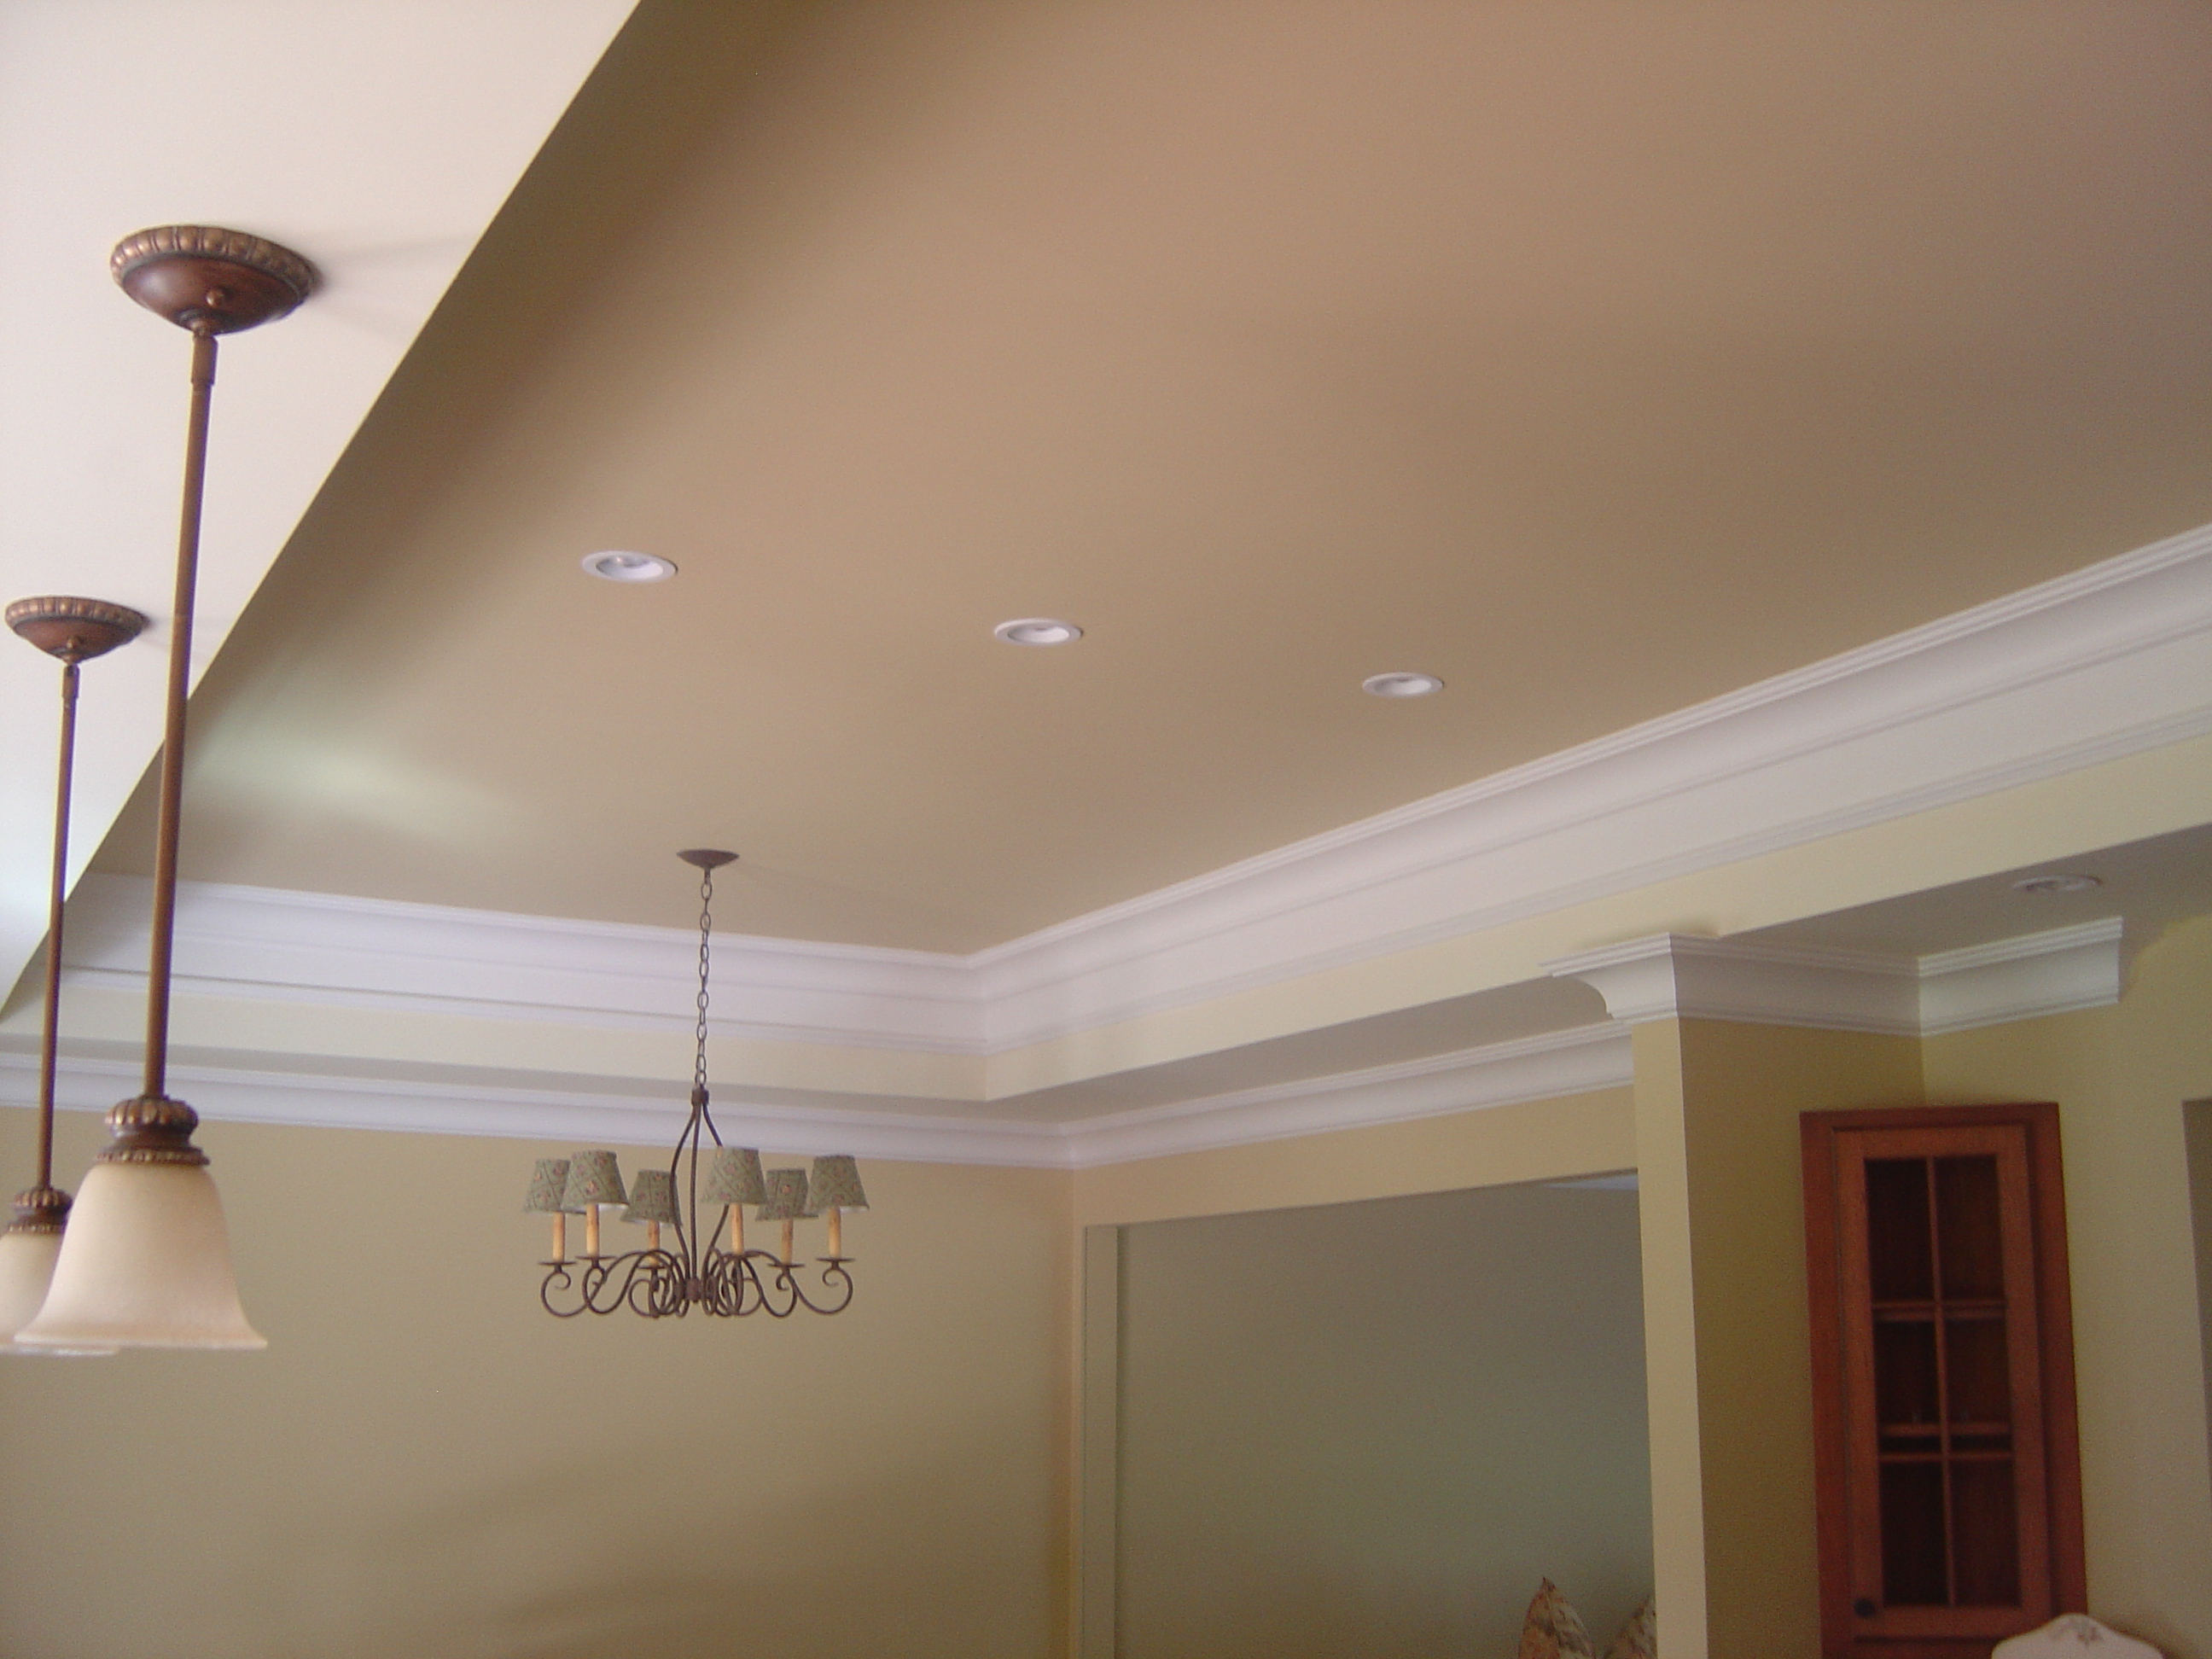 Interior Drop Ceiling Ideas Tray Ceiling Paint Ideas Bedroom